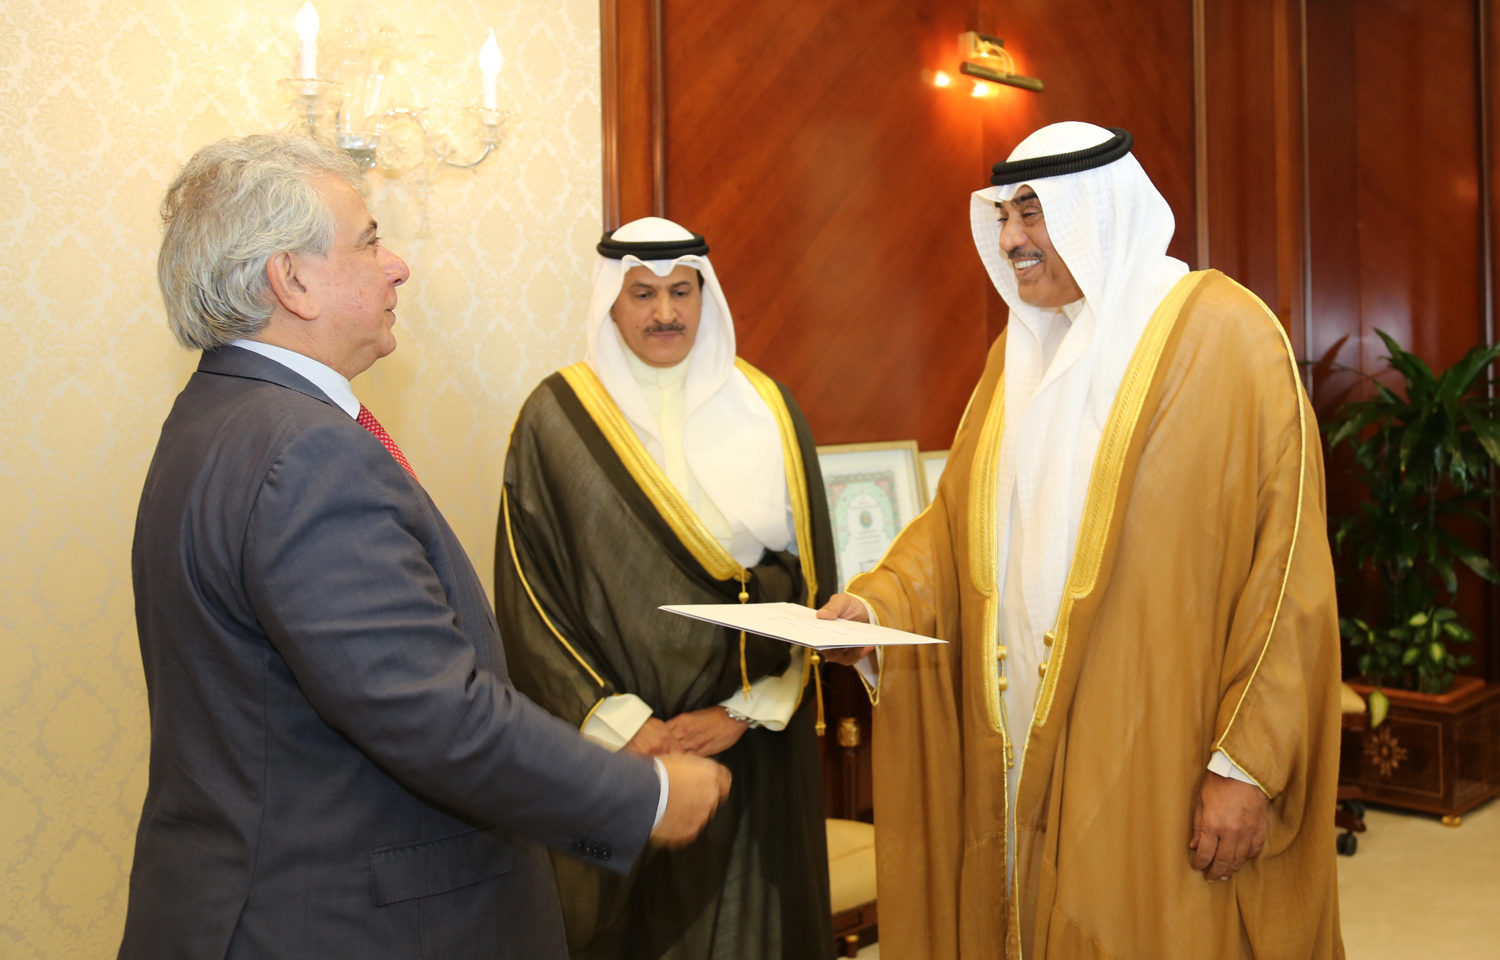 First Deputy Prime Minister and Minister of Foreign Affairs Sheikh Sabah Al-Khaled Al-Hamad Al-Sabah receives the newly appointed Ambassador of Brazil to Kuwait